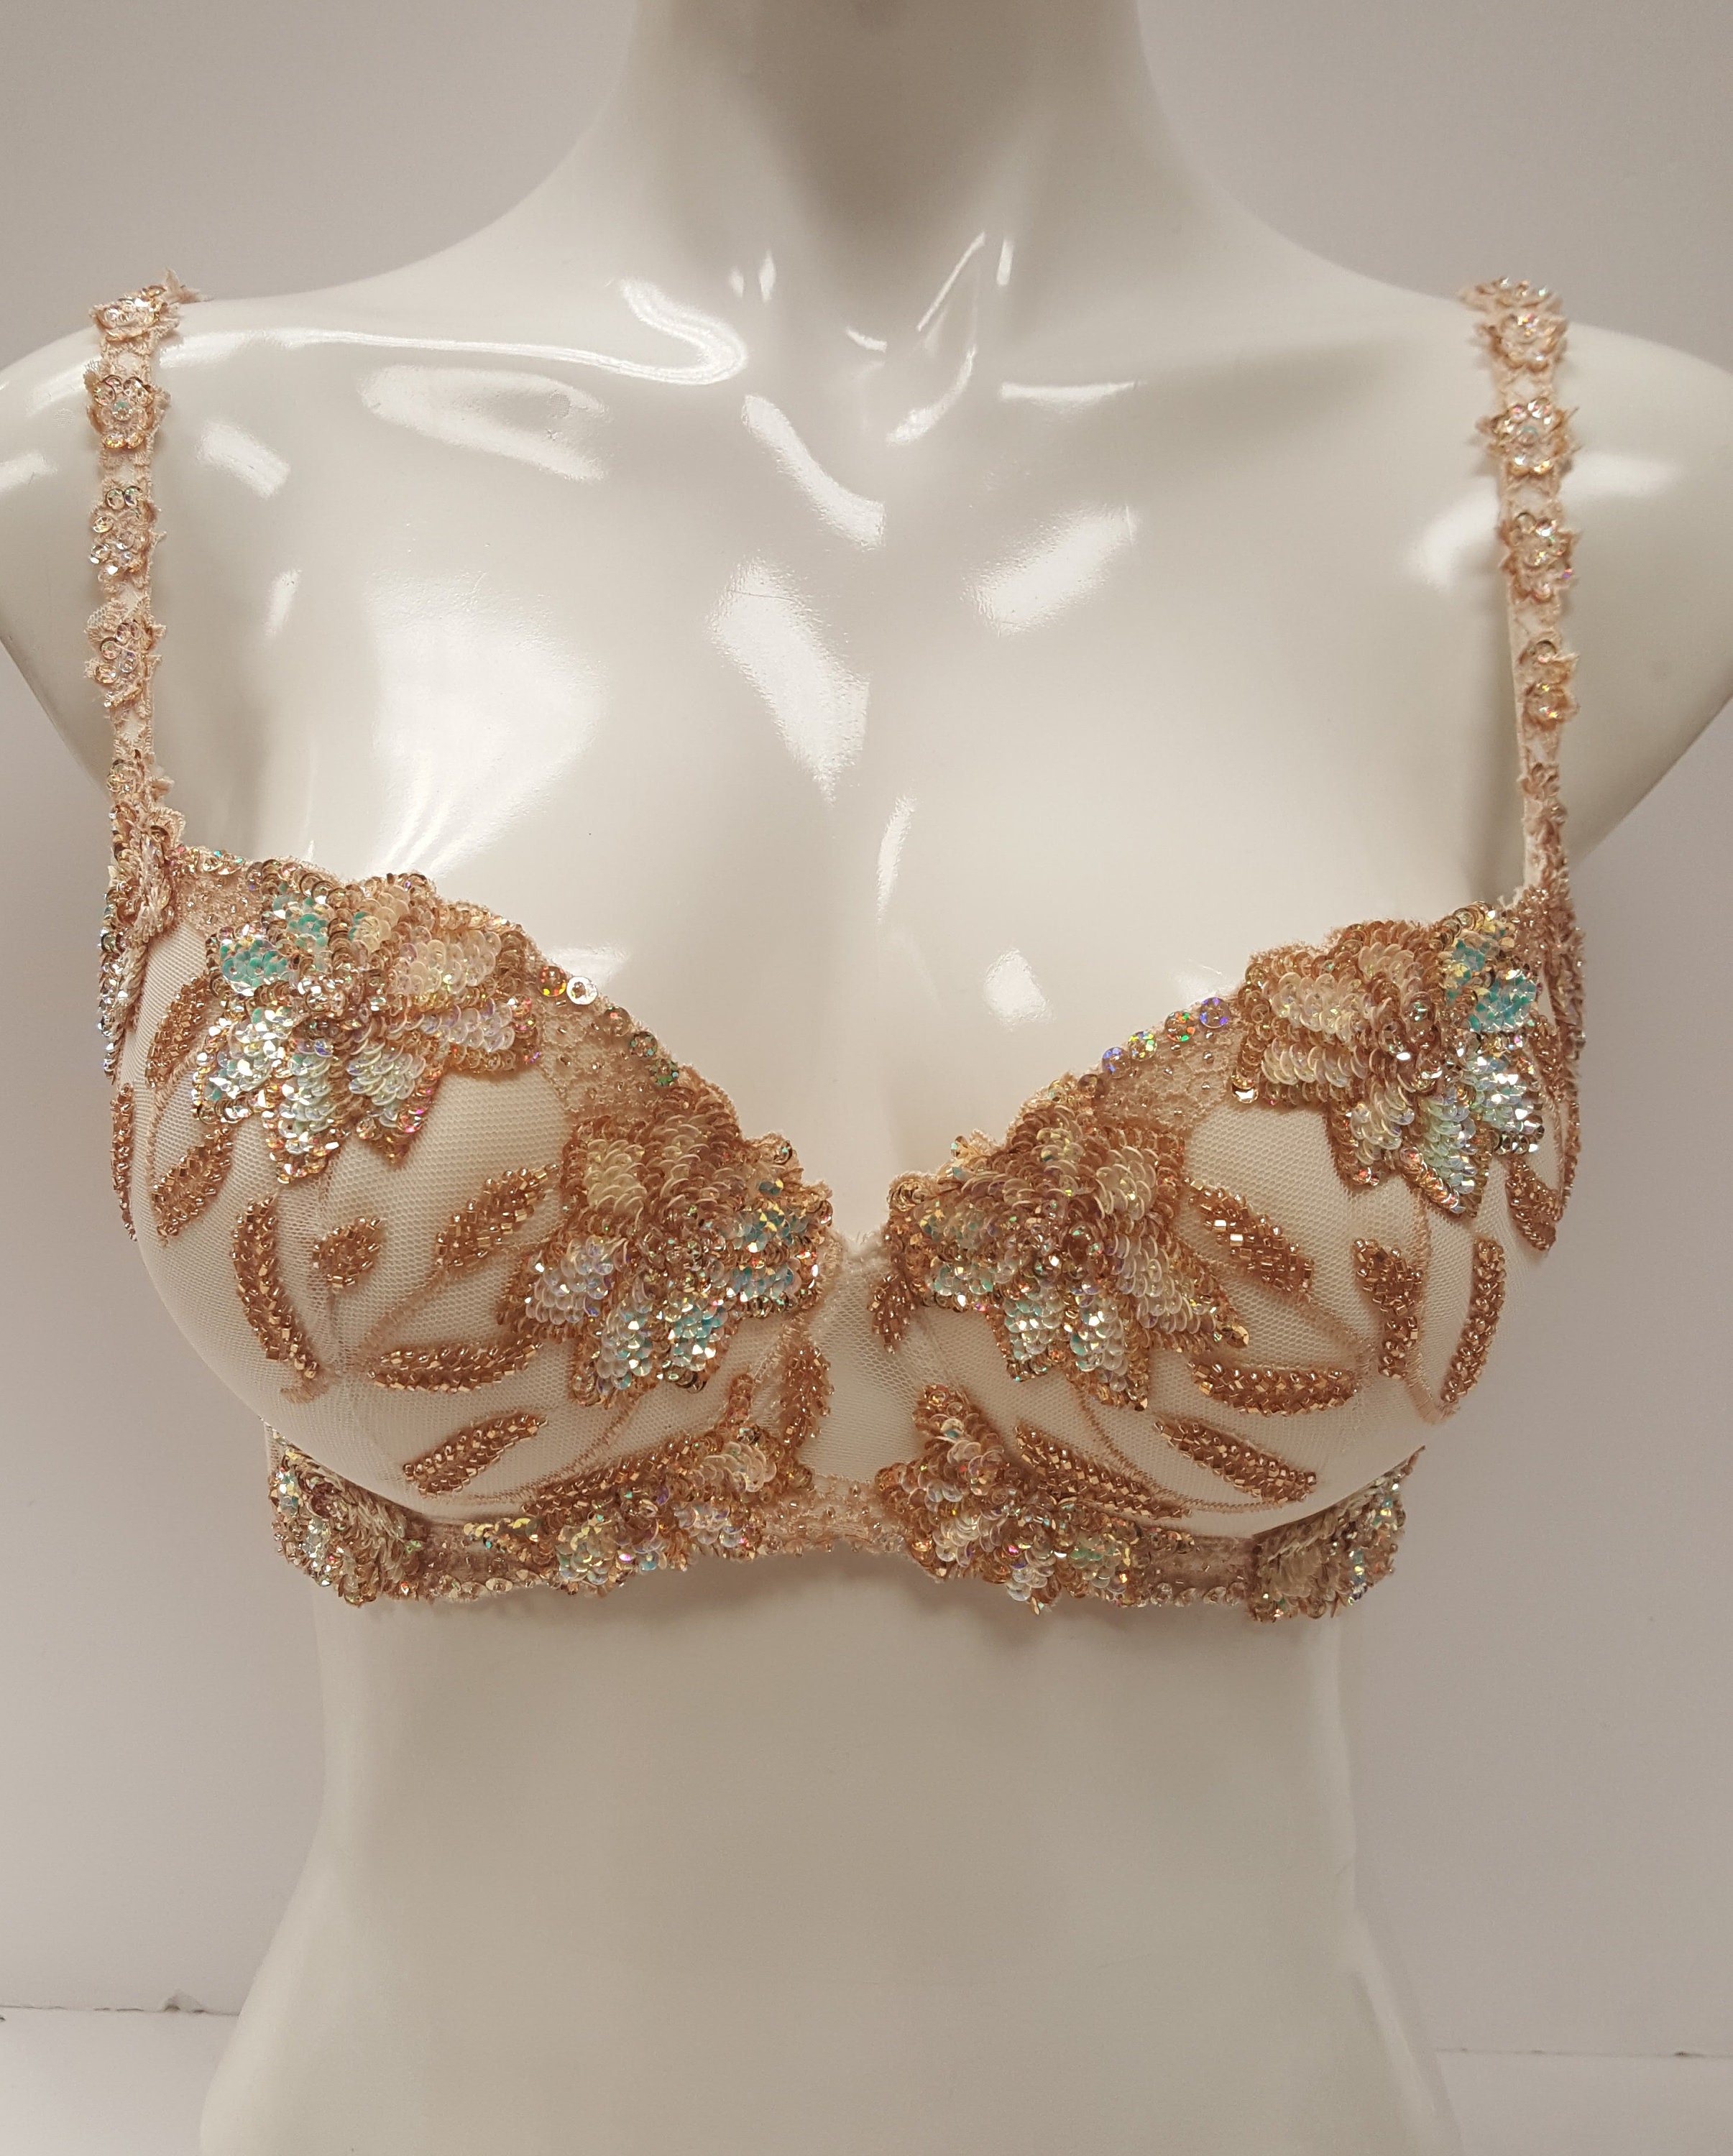 Embellished Ivory Cream Push up Bra Top Bustier Hand Decorated With Sequins.  